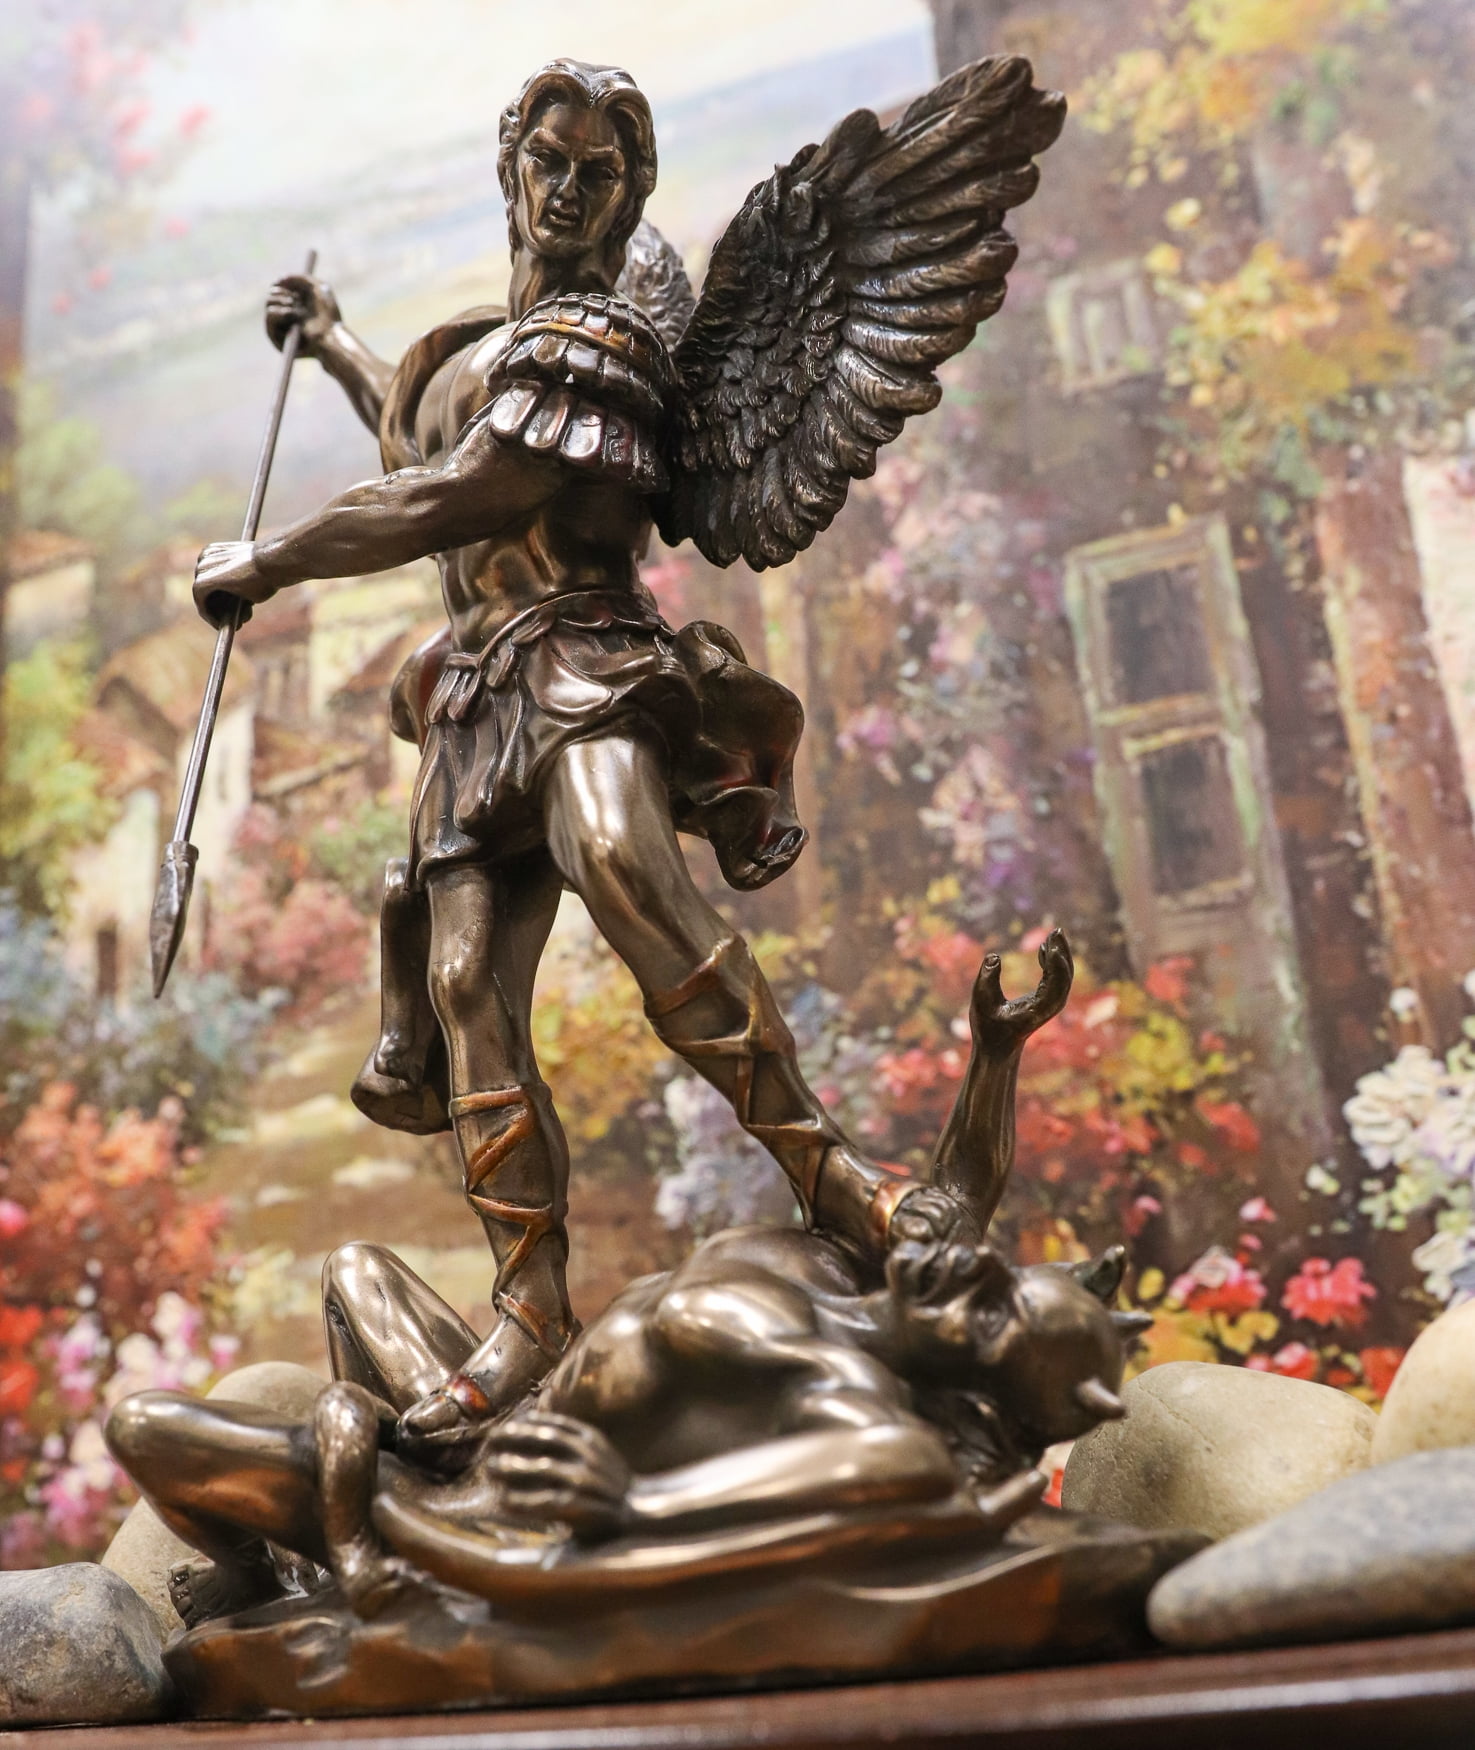 St. Michael San Miguel The Great Protector Archangel Defeating 